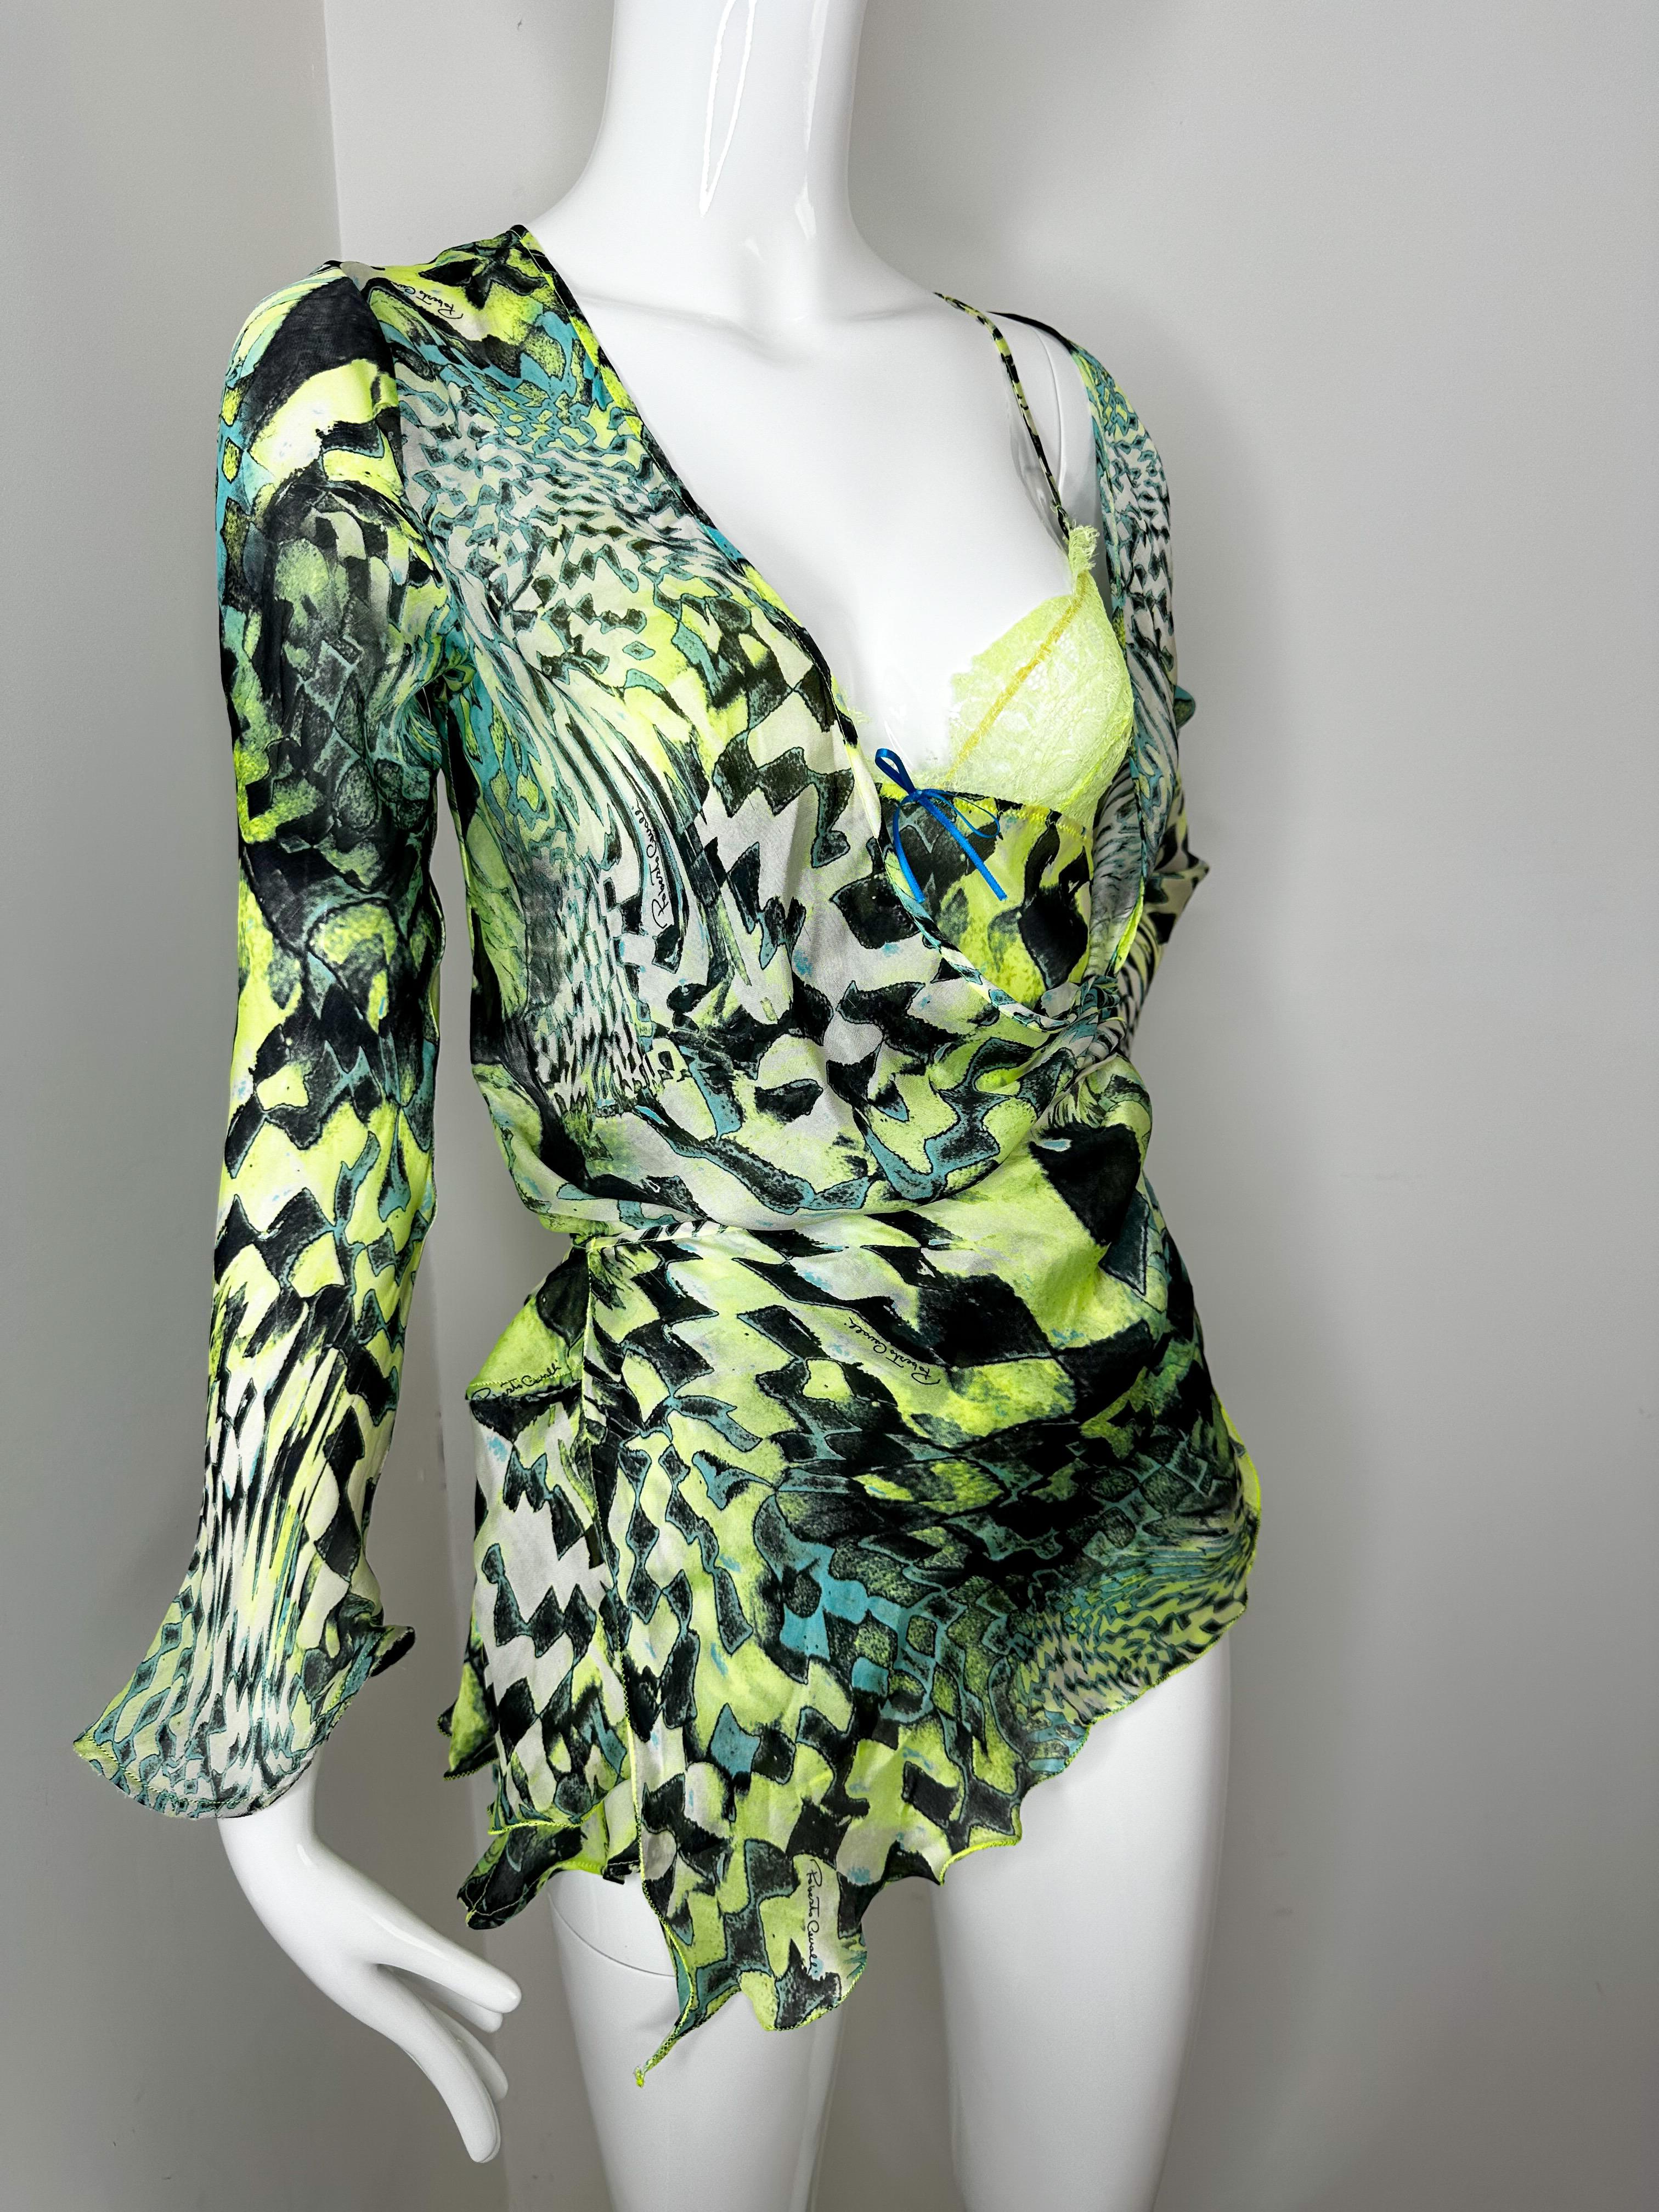 Roberto Cavalli 2003 silk set 
Camisole with a cardigan/blouse that can be worn wrapped around or open in the front 

Size XS fits S as well 
Good vintage condition. Normal wear from age 